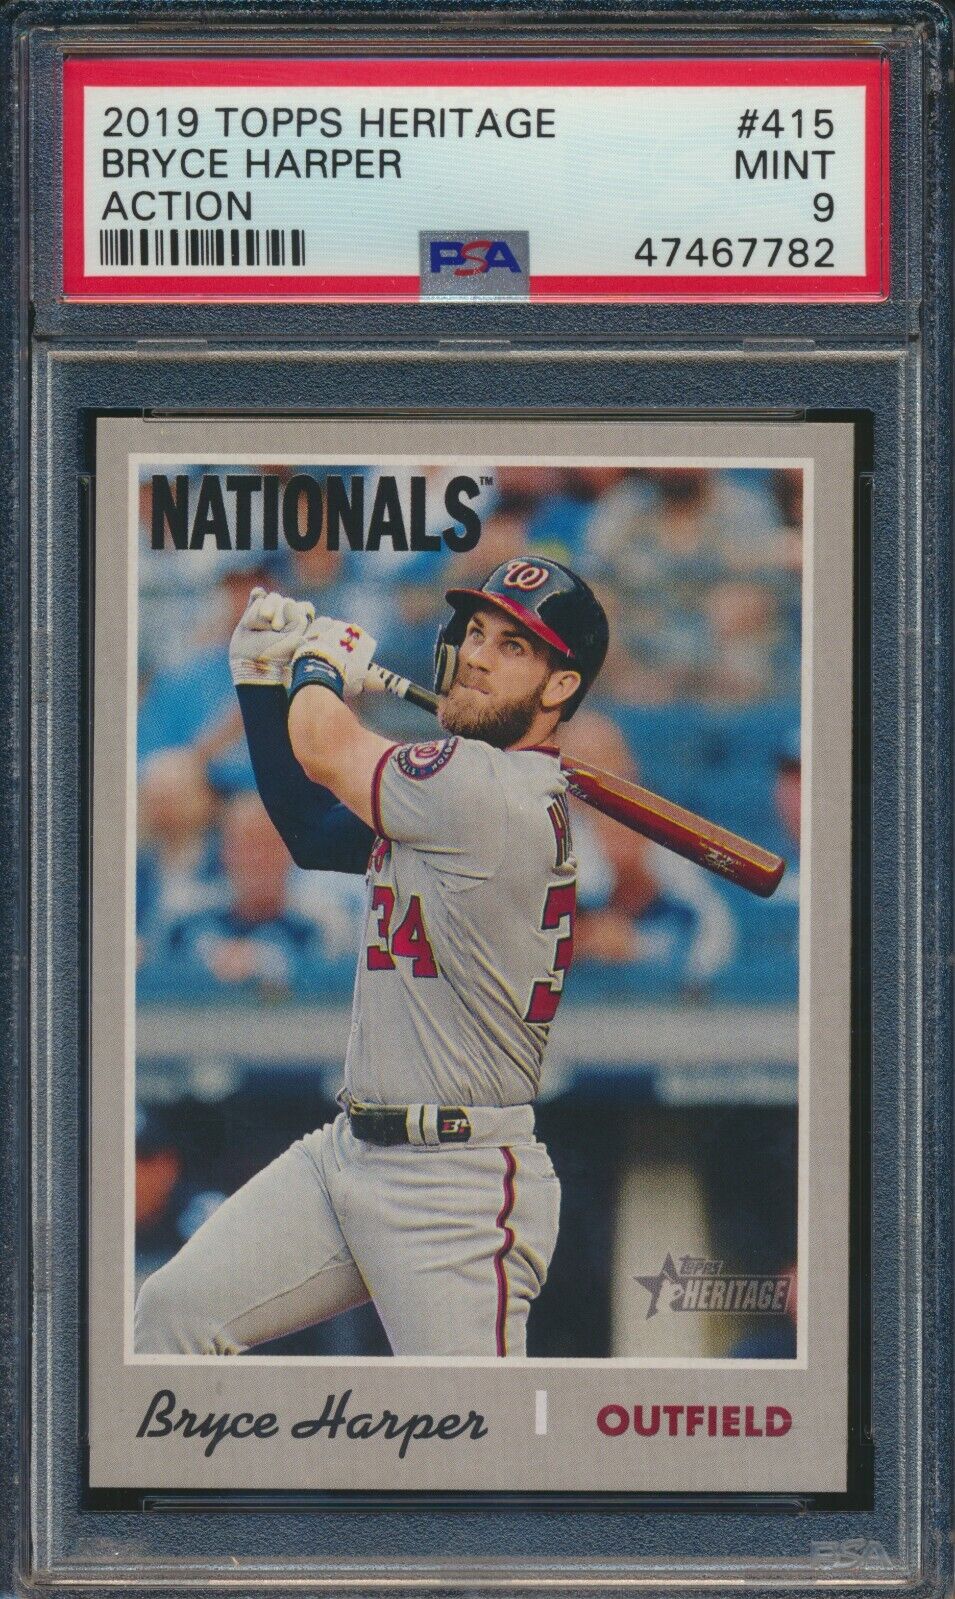 2019 Topps Heritage Bryce Harper Action Nationals/Phillies #415 PSA 9 MINT